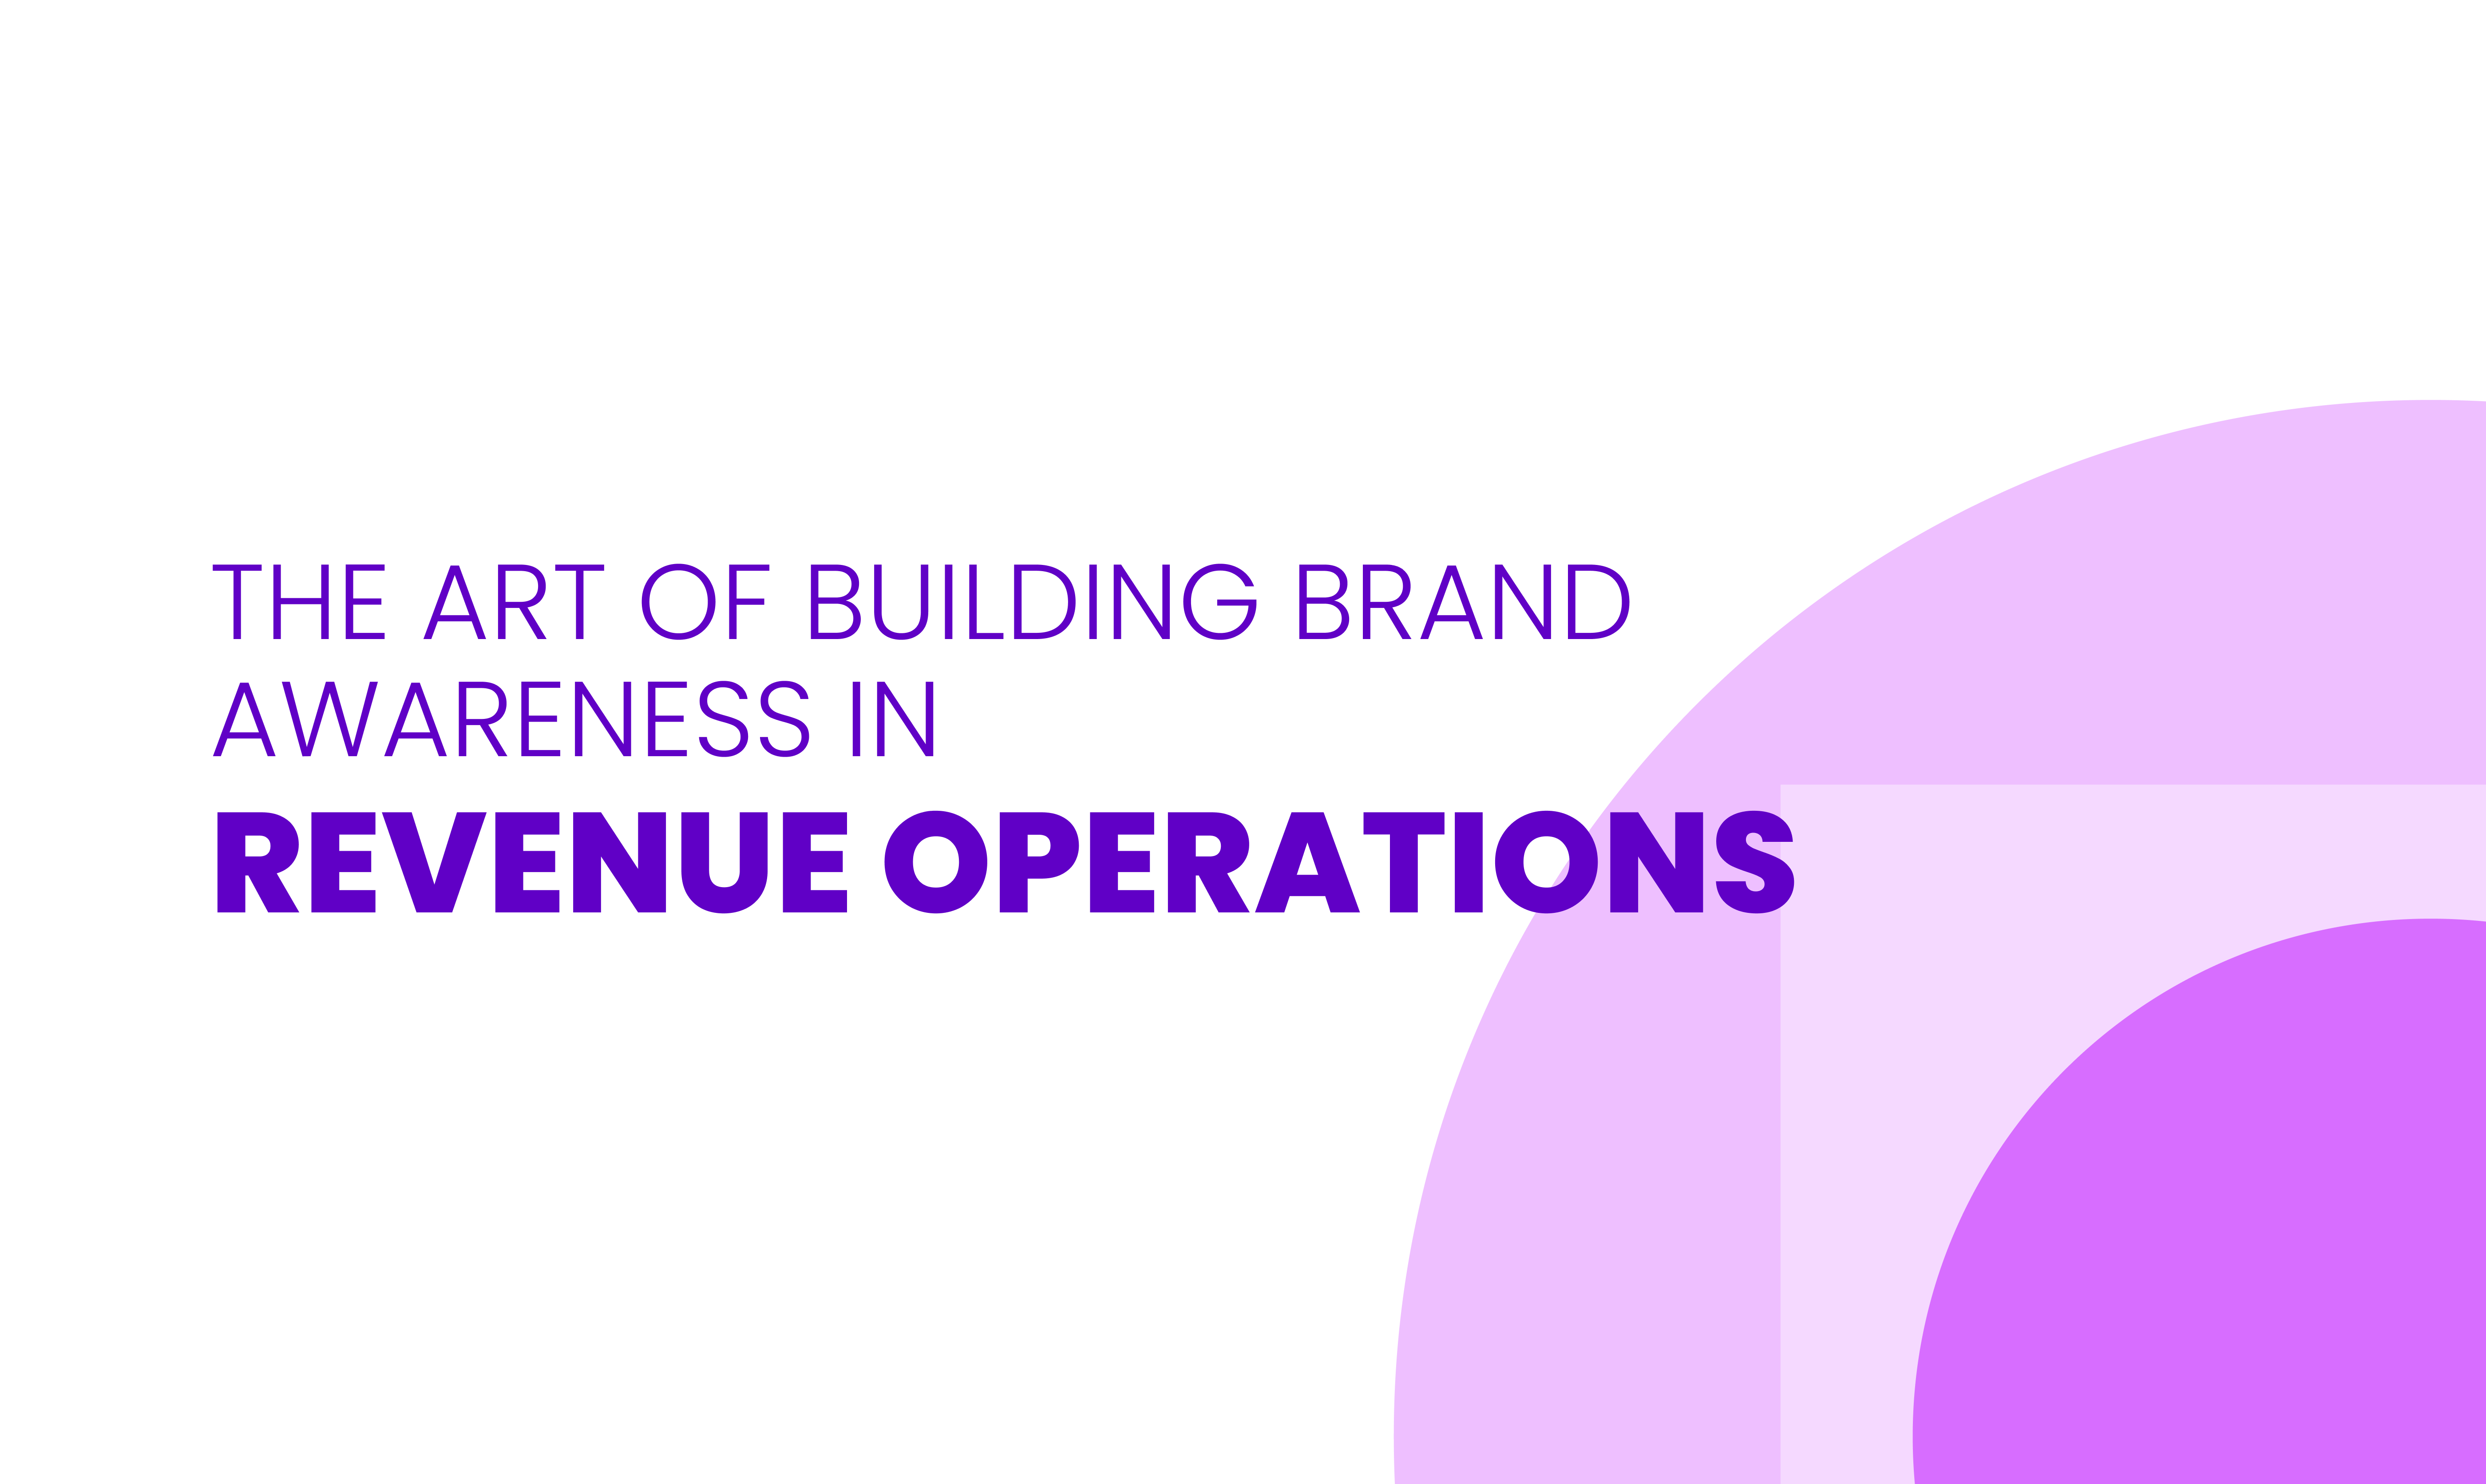 THE ART OF BUILDING BRAND AWARENESS IN REVENUE OPERATIONS